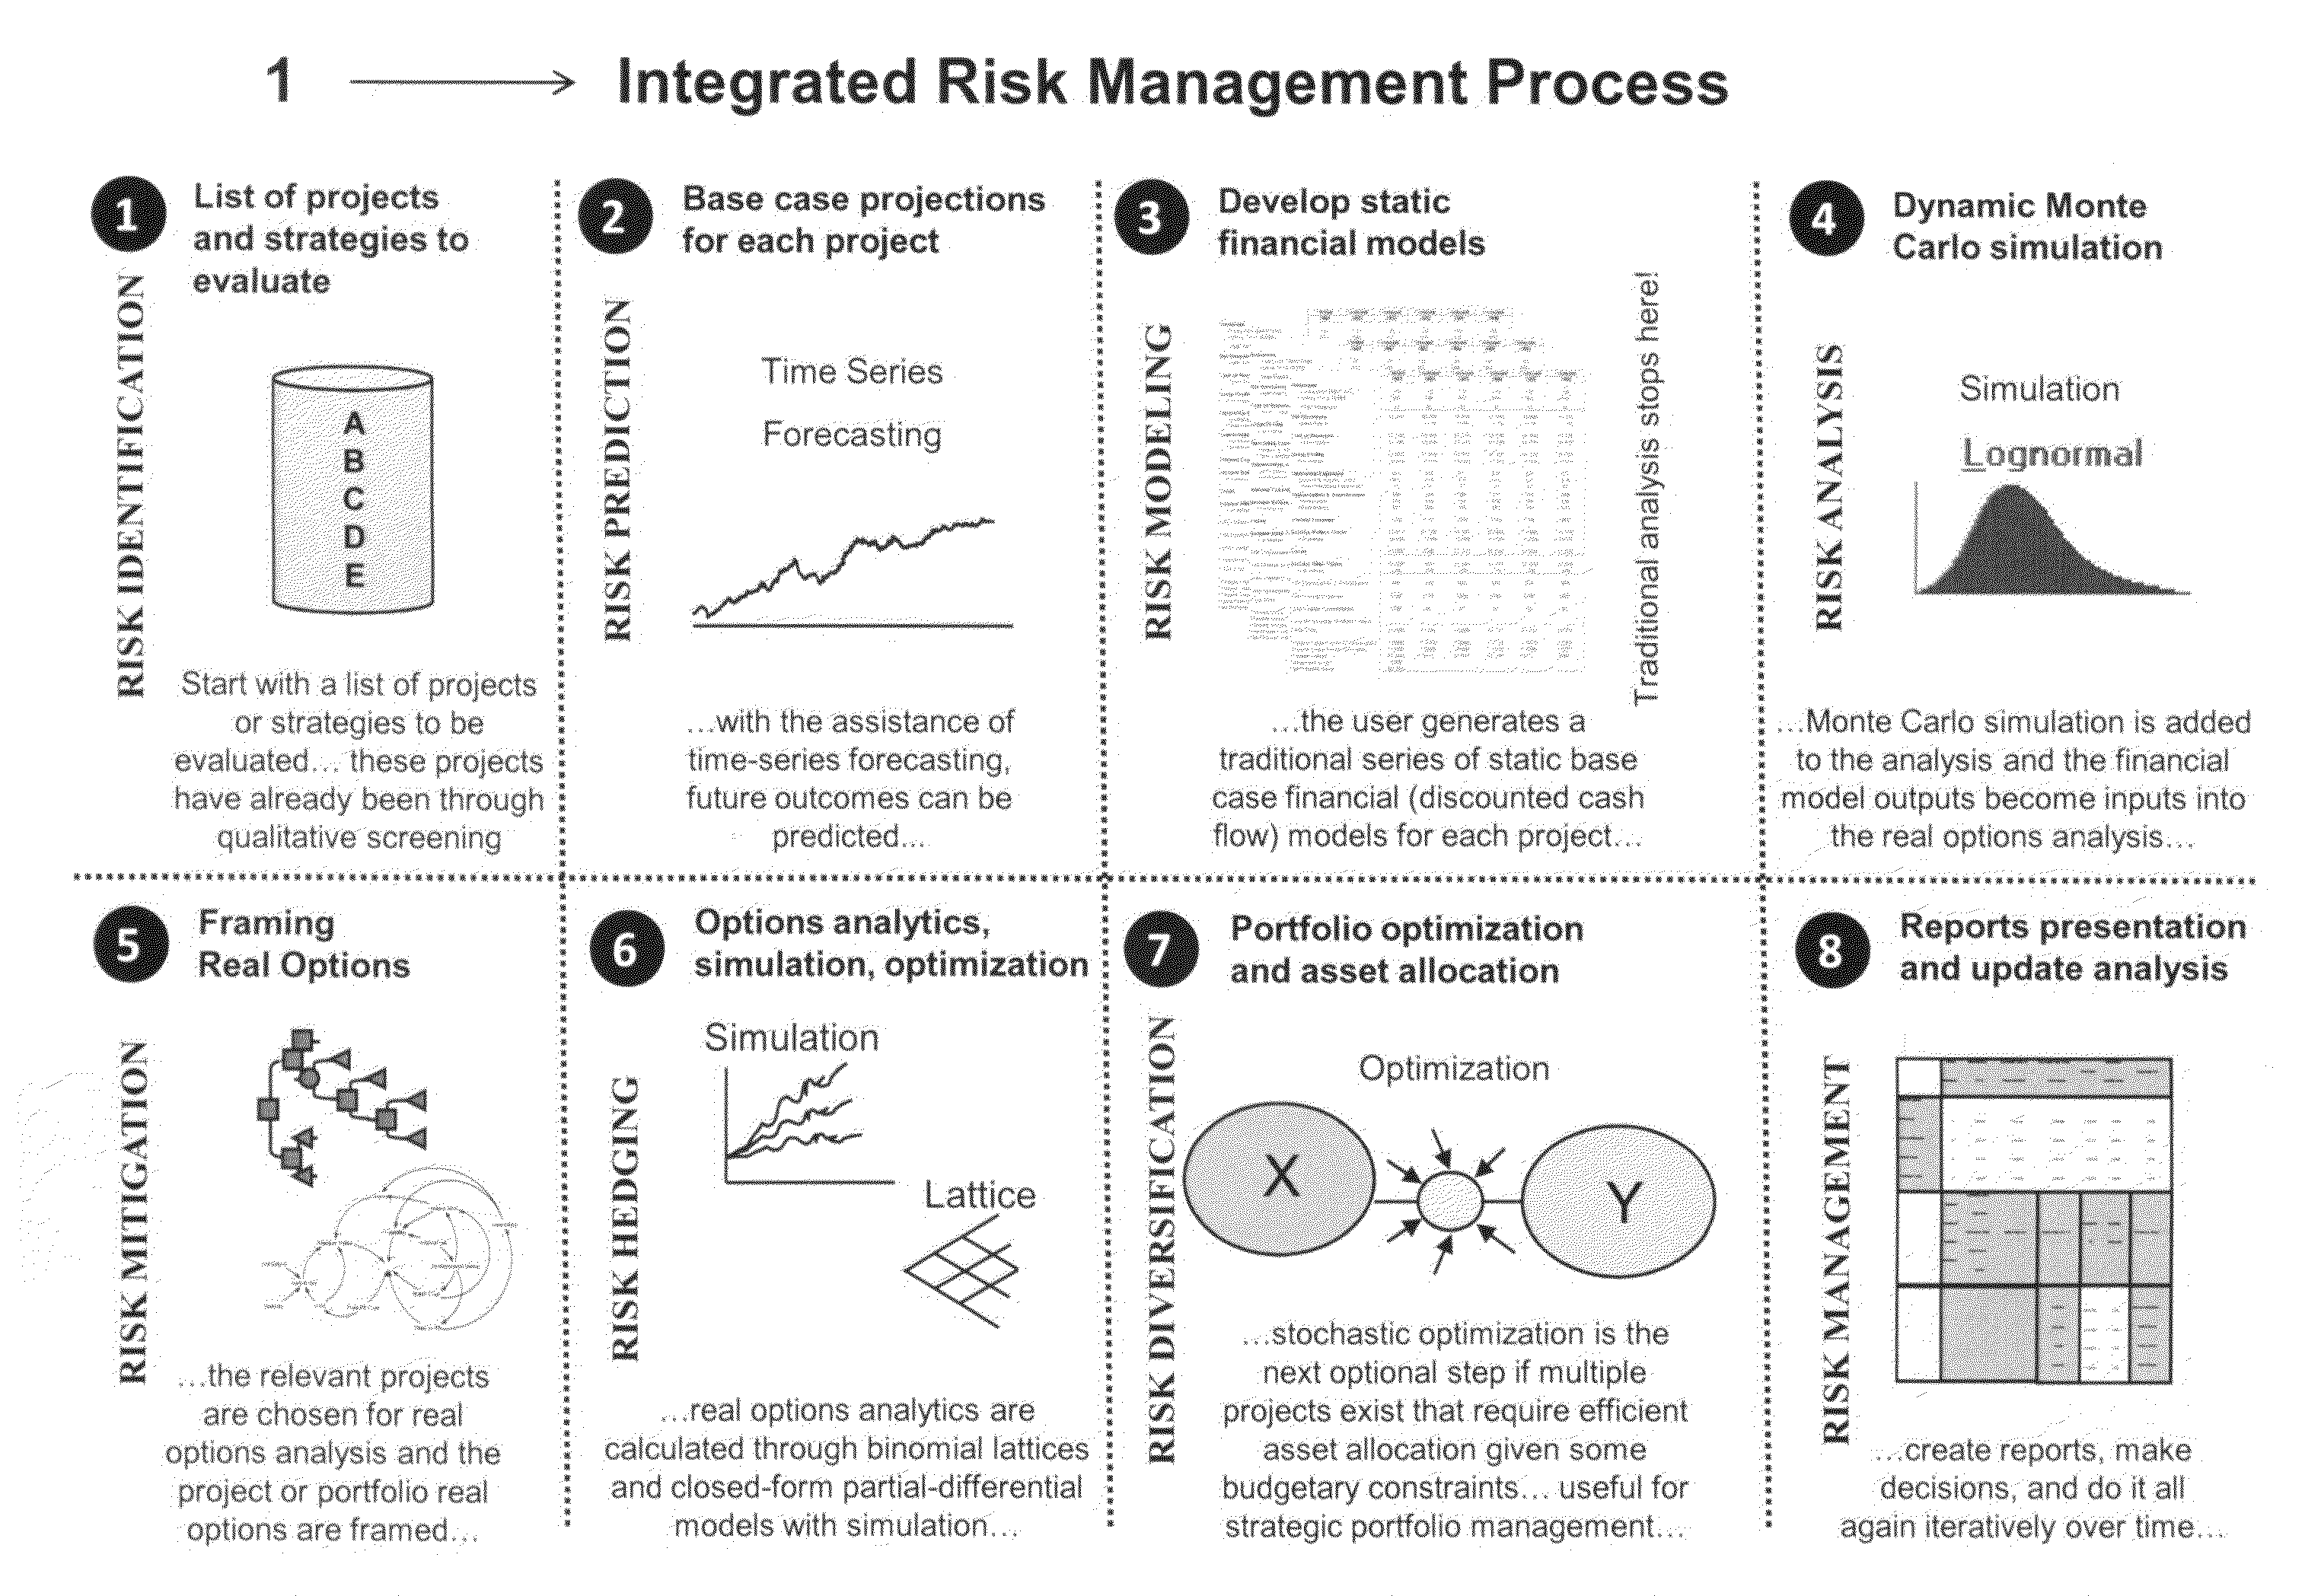 Integrated risk management process